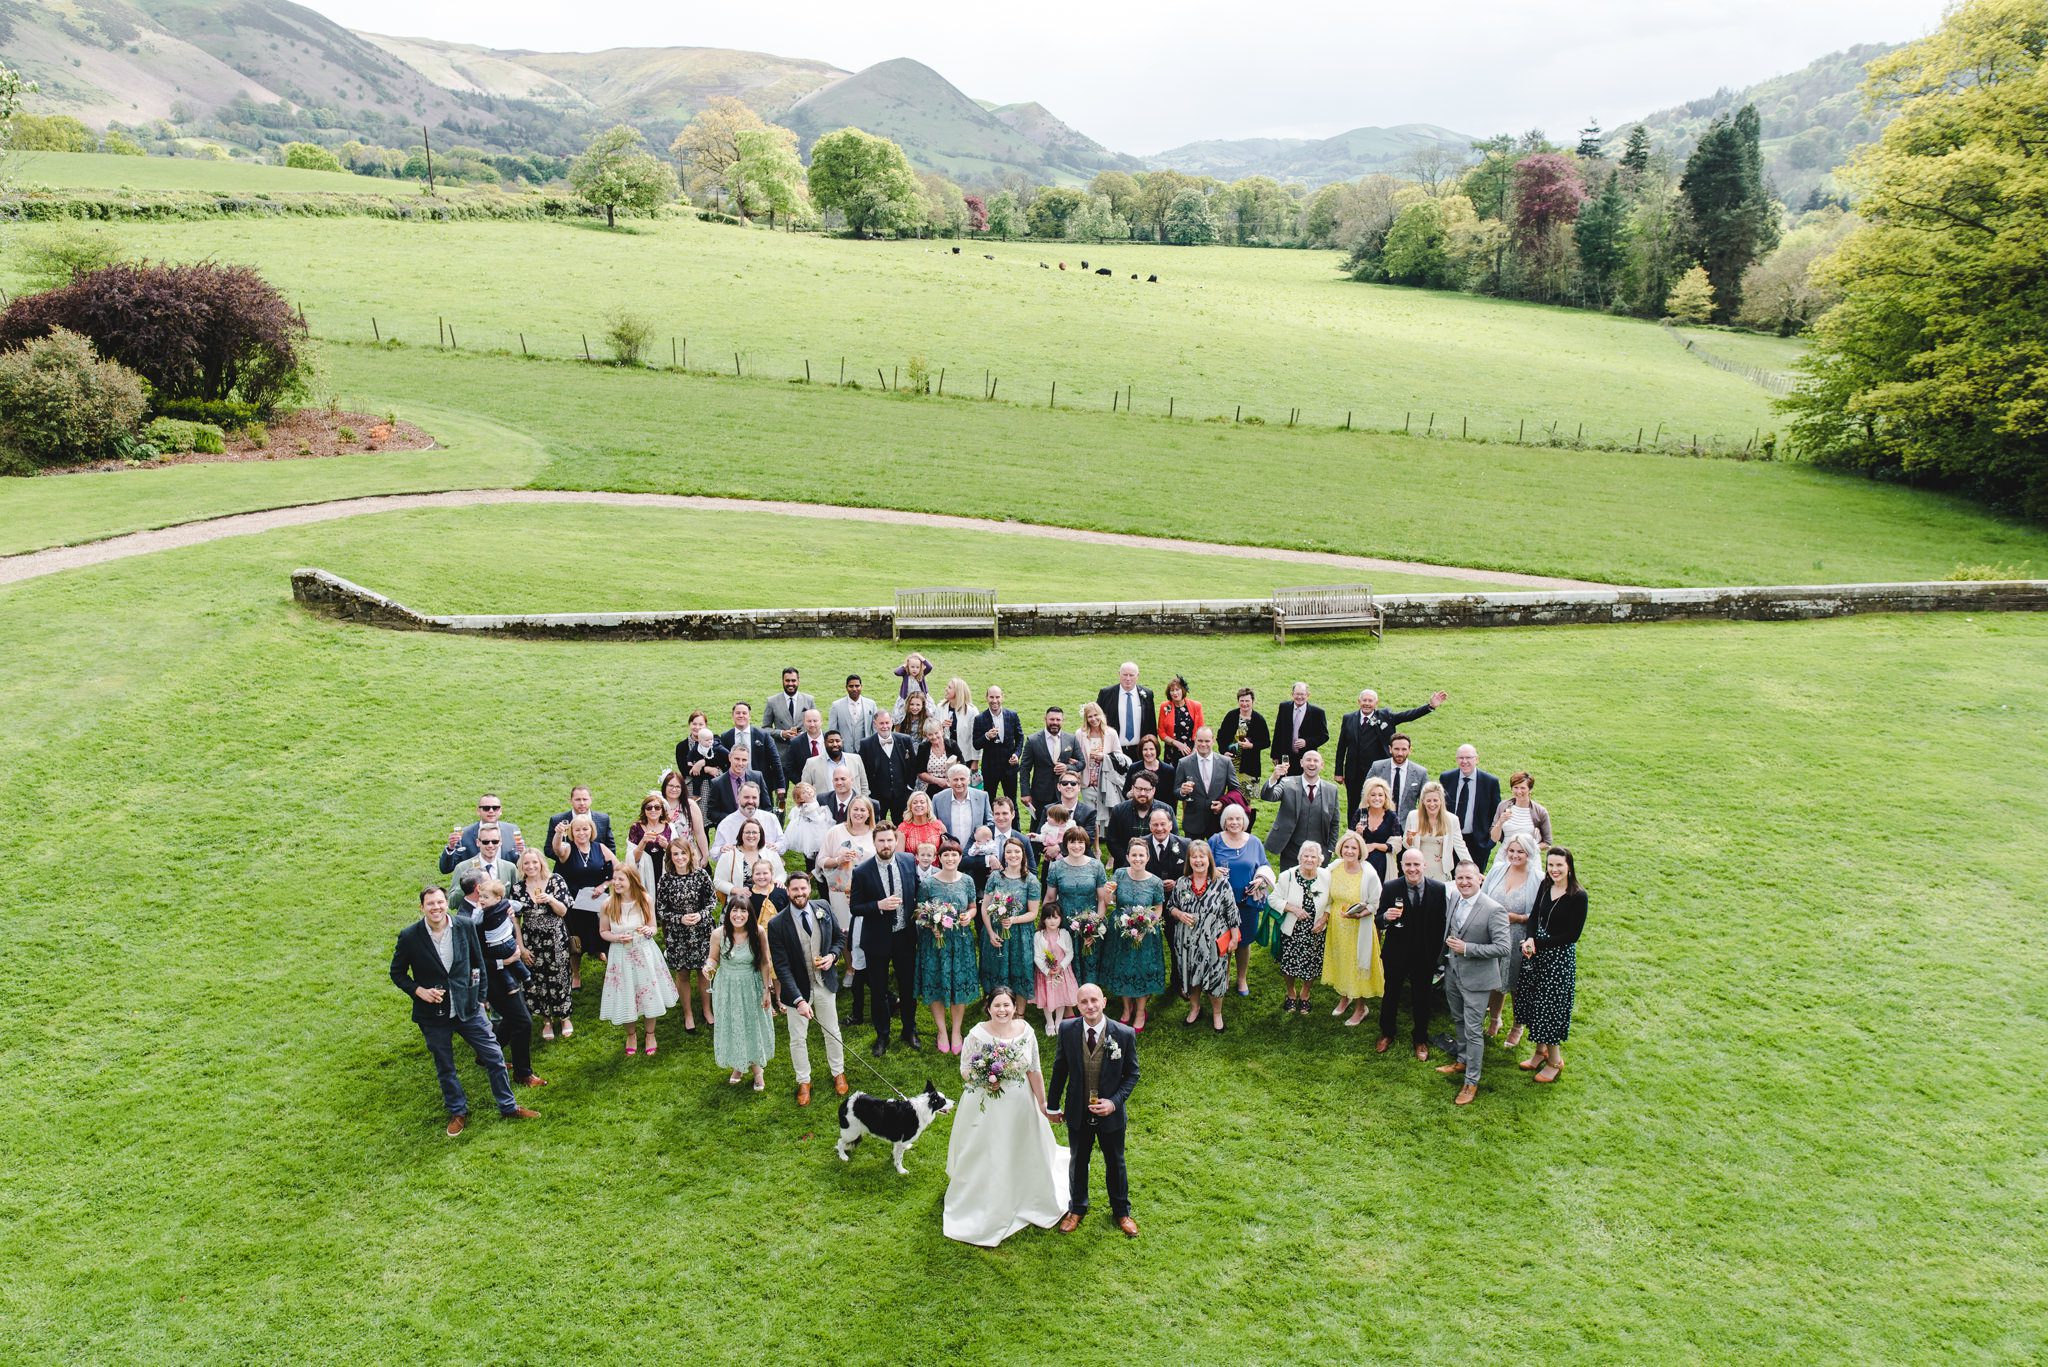 A group shot at a wedding showing the hills